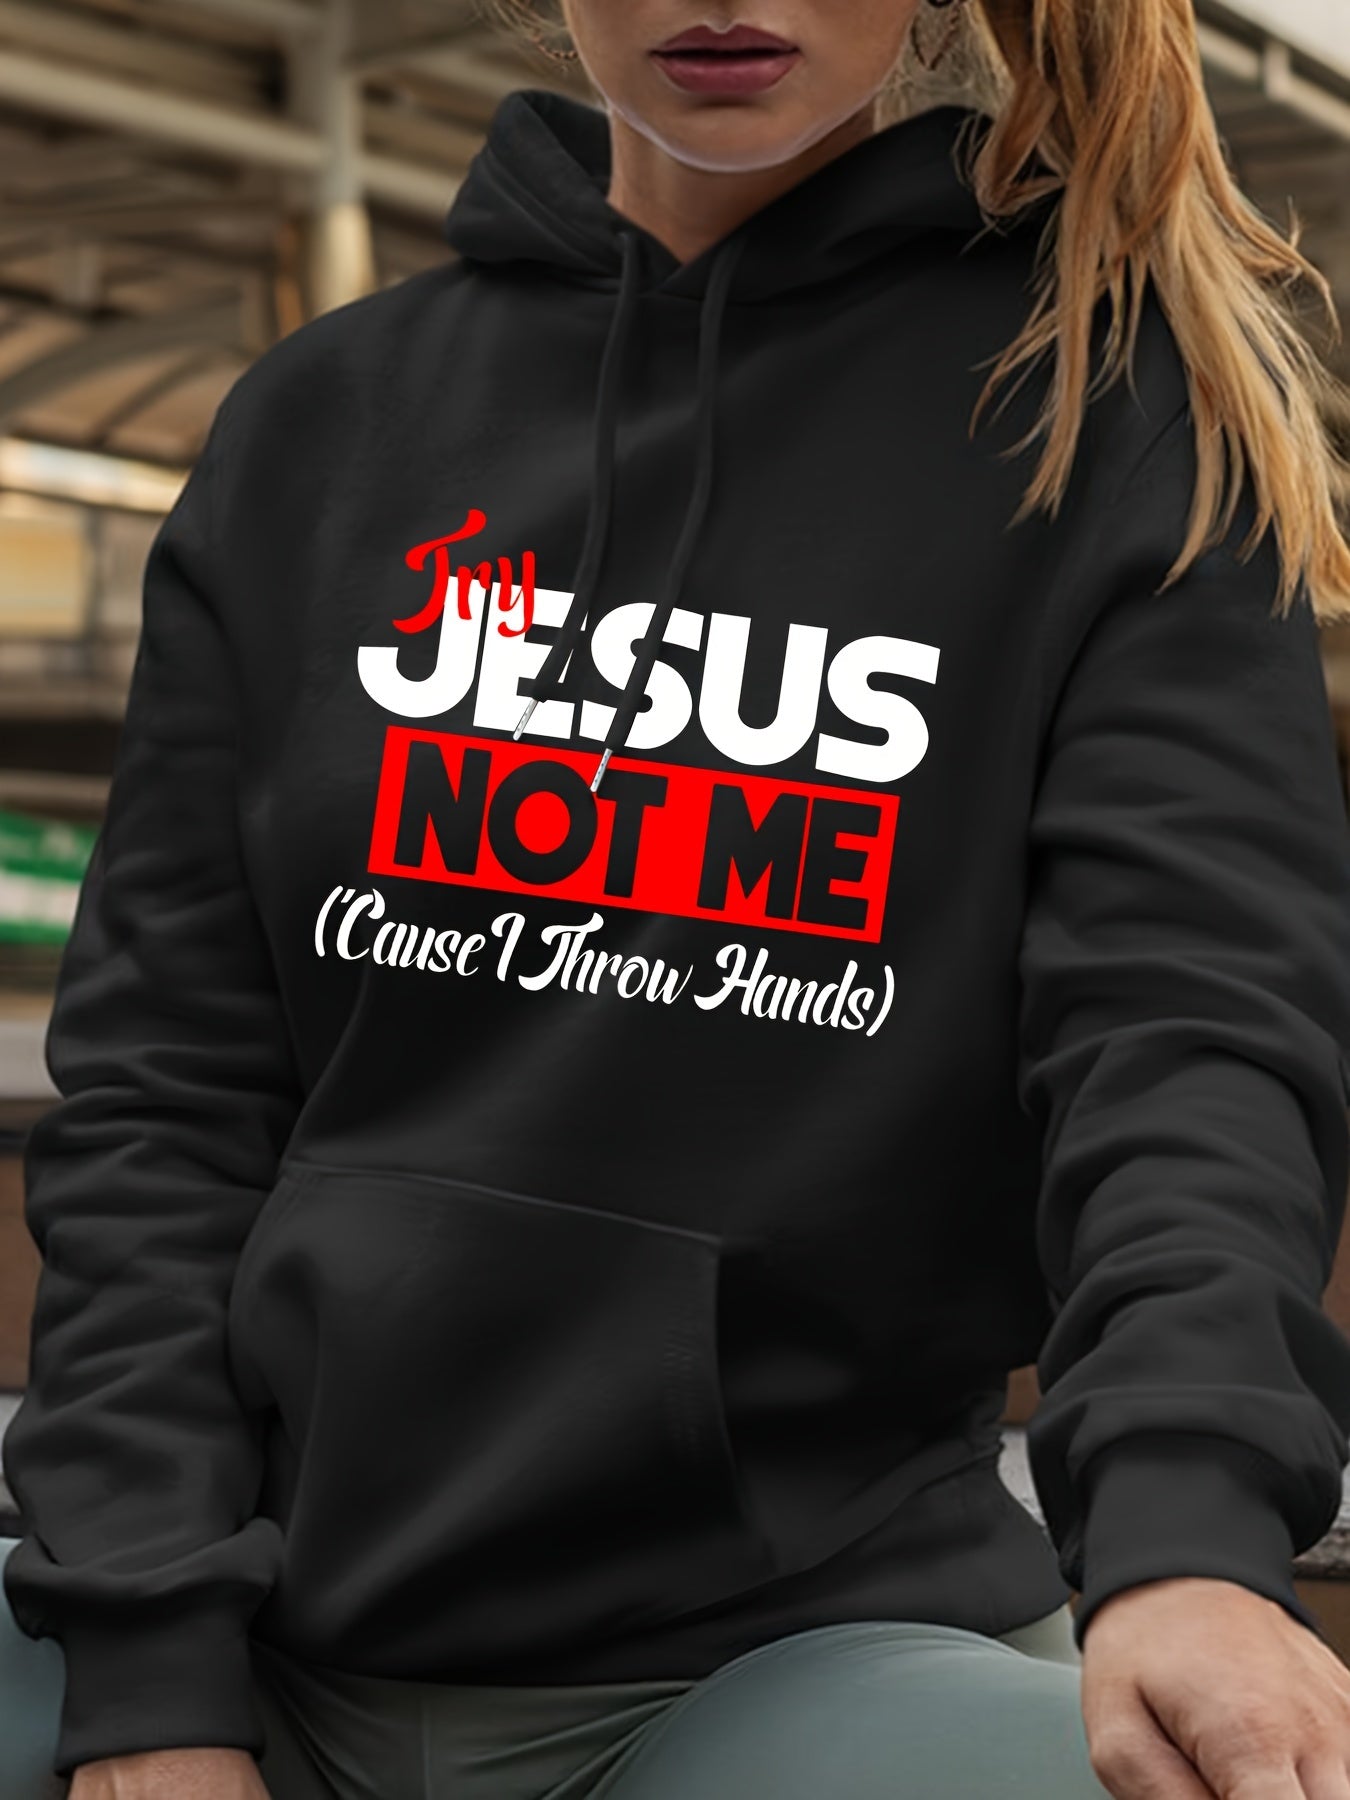 Try Jesus Not Me 'Cause I Throw Hands Funny Women's Christian Pullover Hooded Sweatshirt claimedbygoddesigns